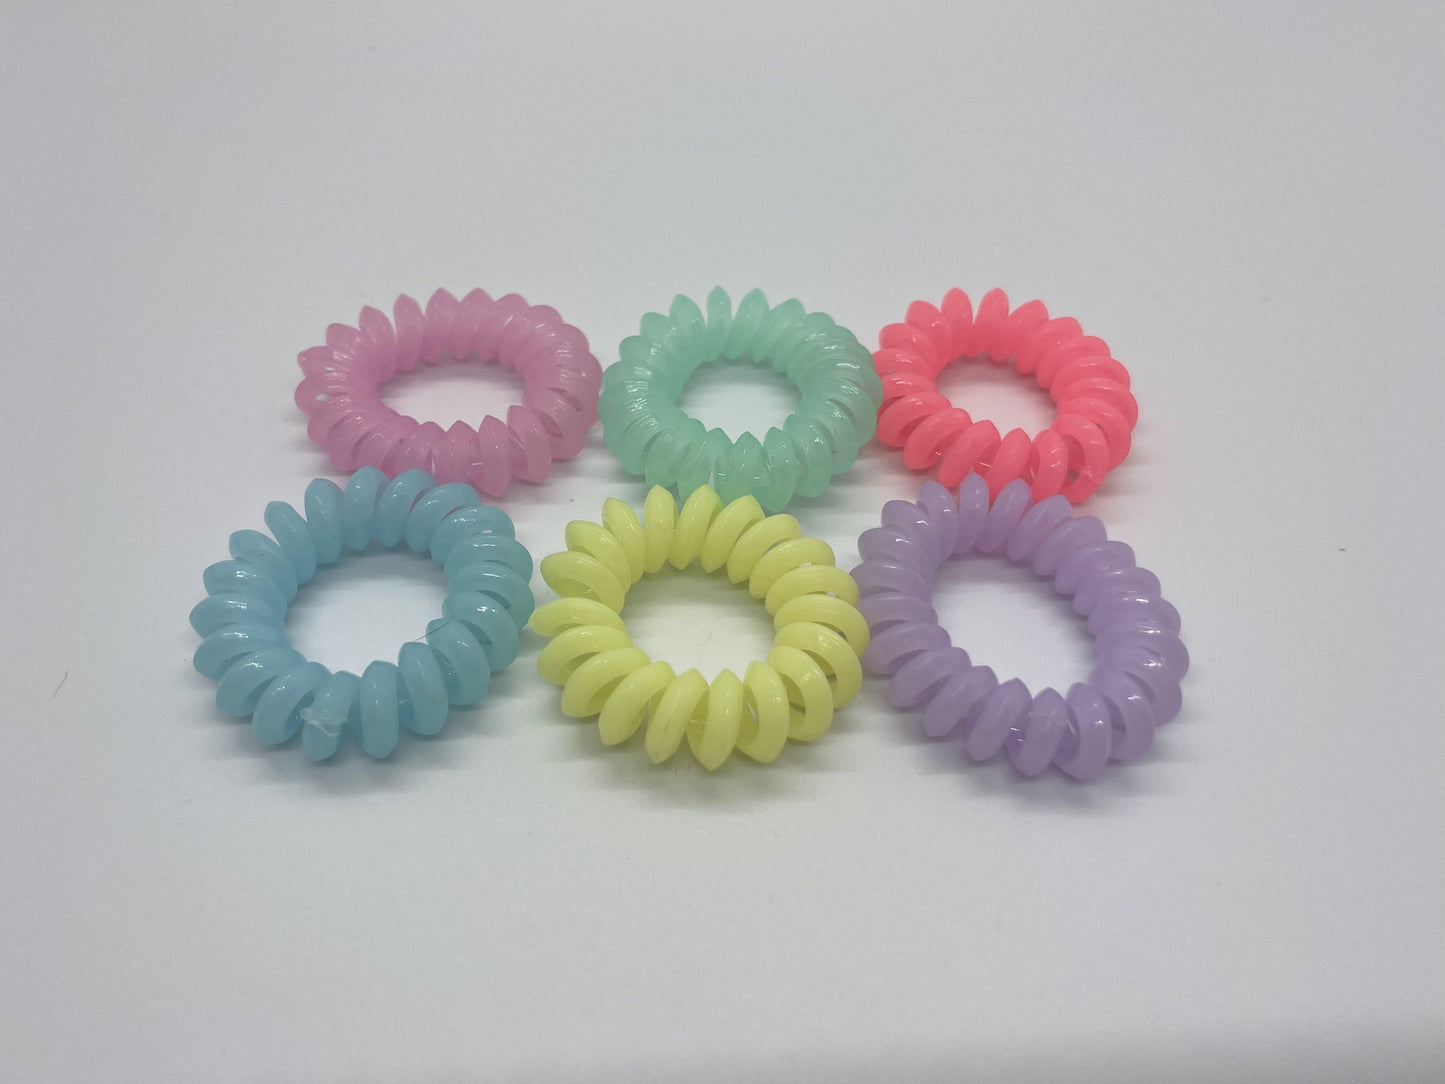 a set of the 6 bright color hair ties on a white background